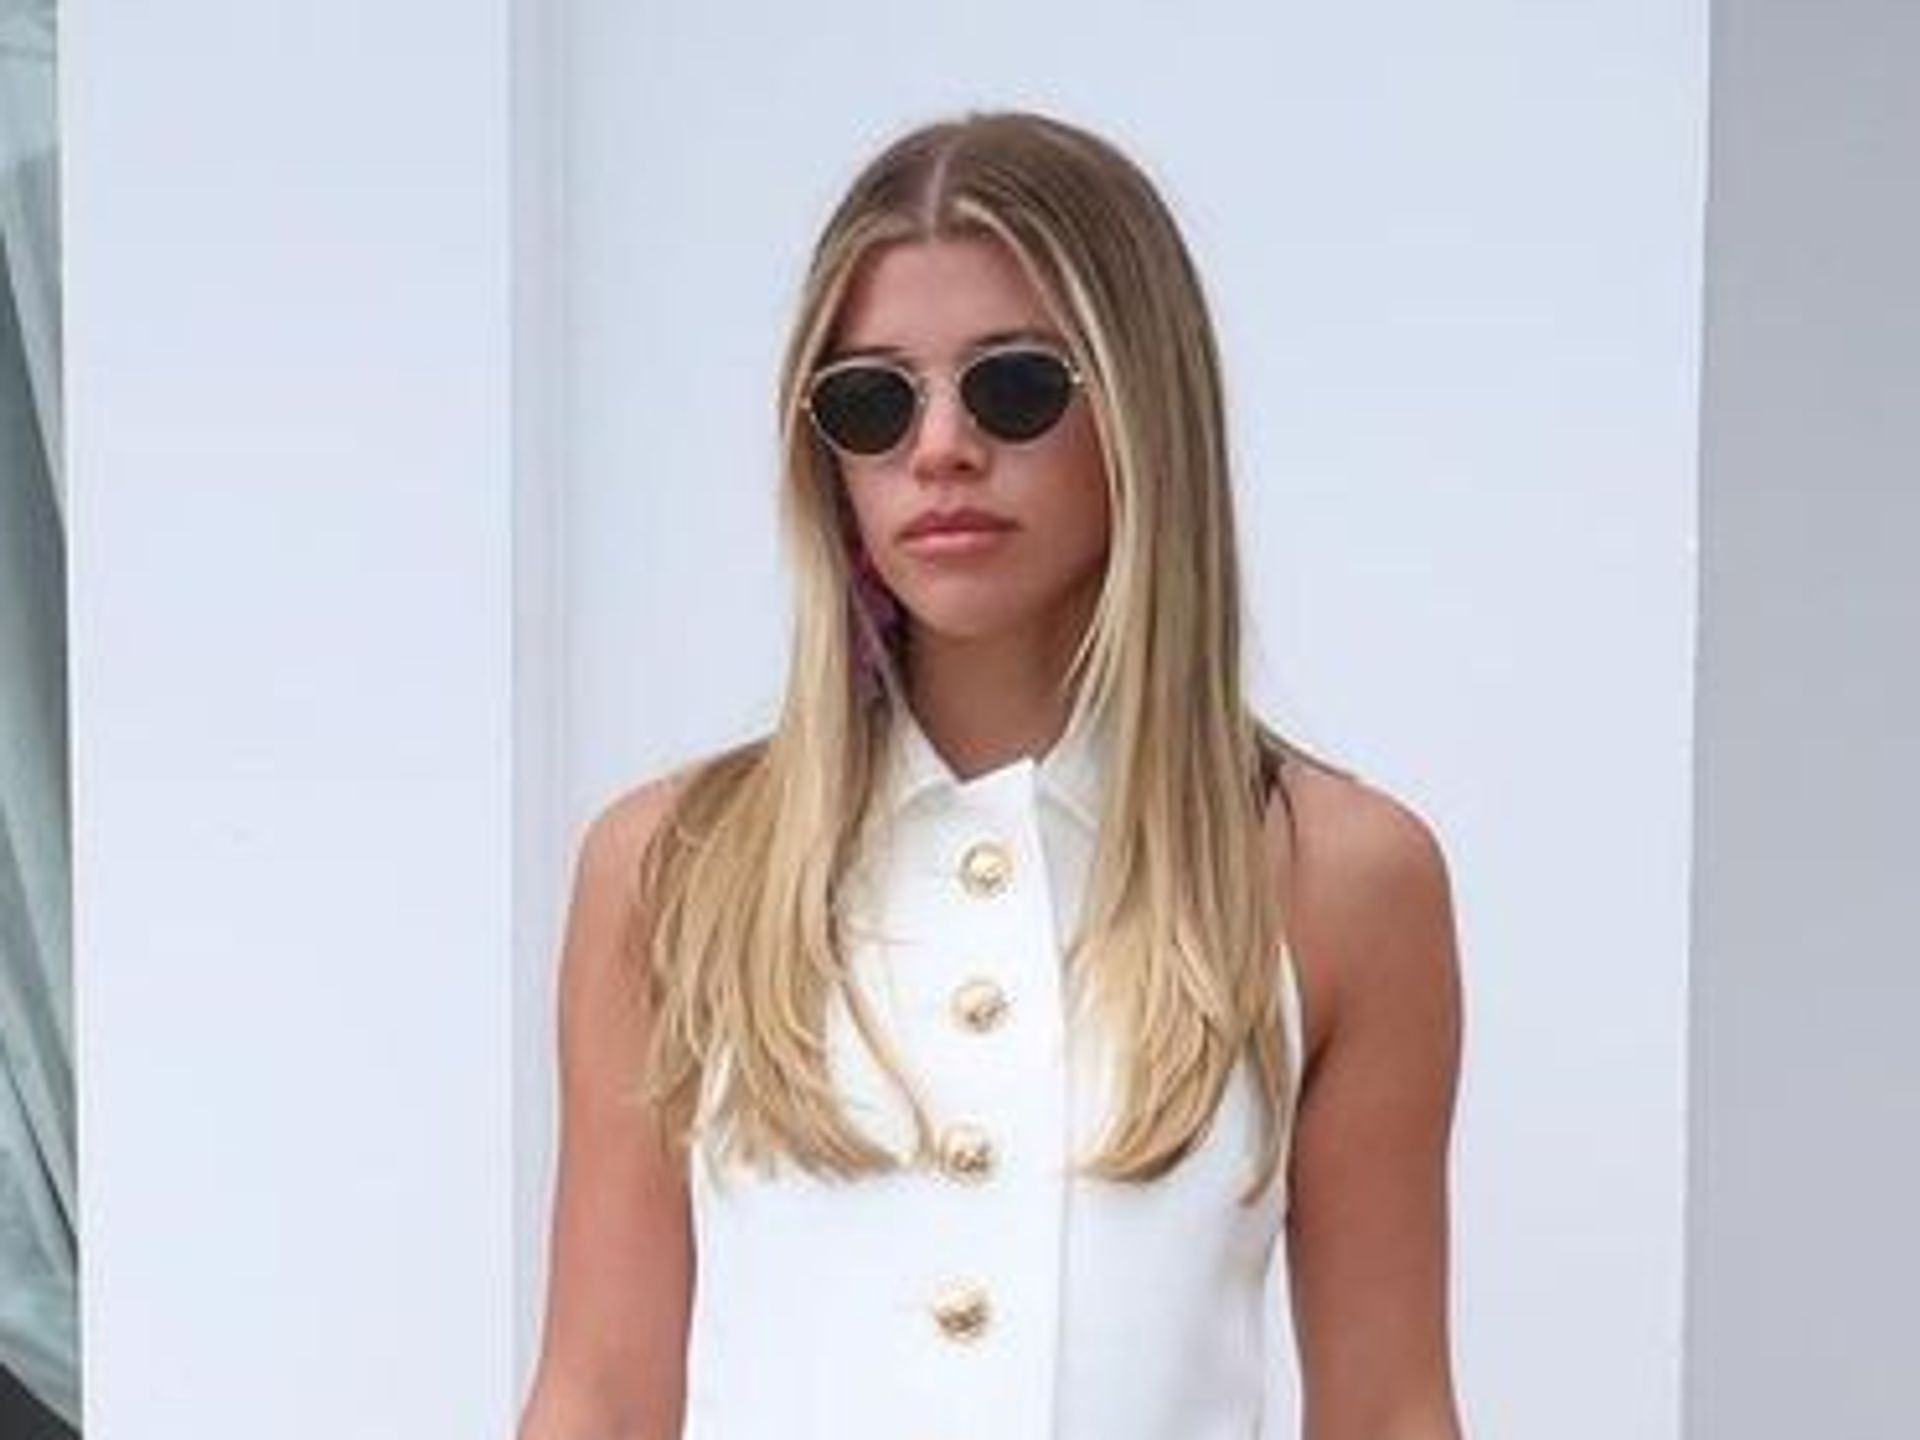 Sofia Richie's wedding: Here's everything we know so far - see photos